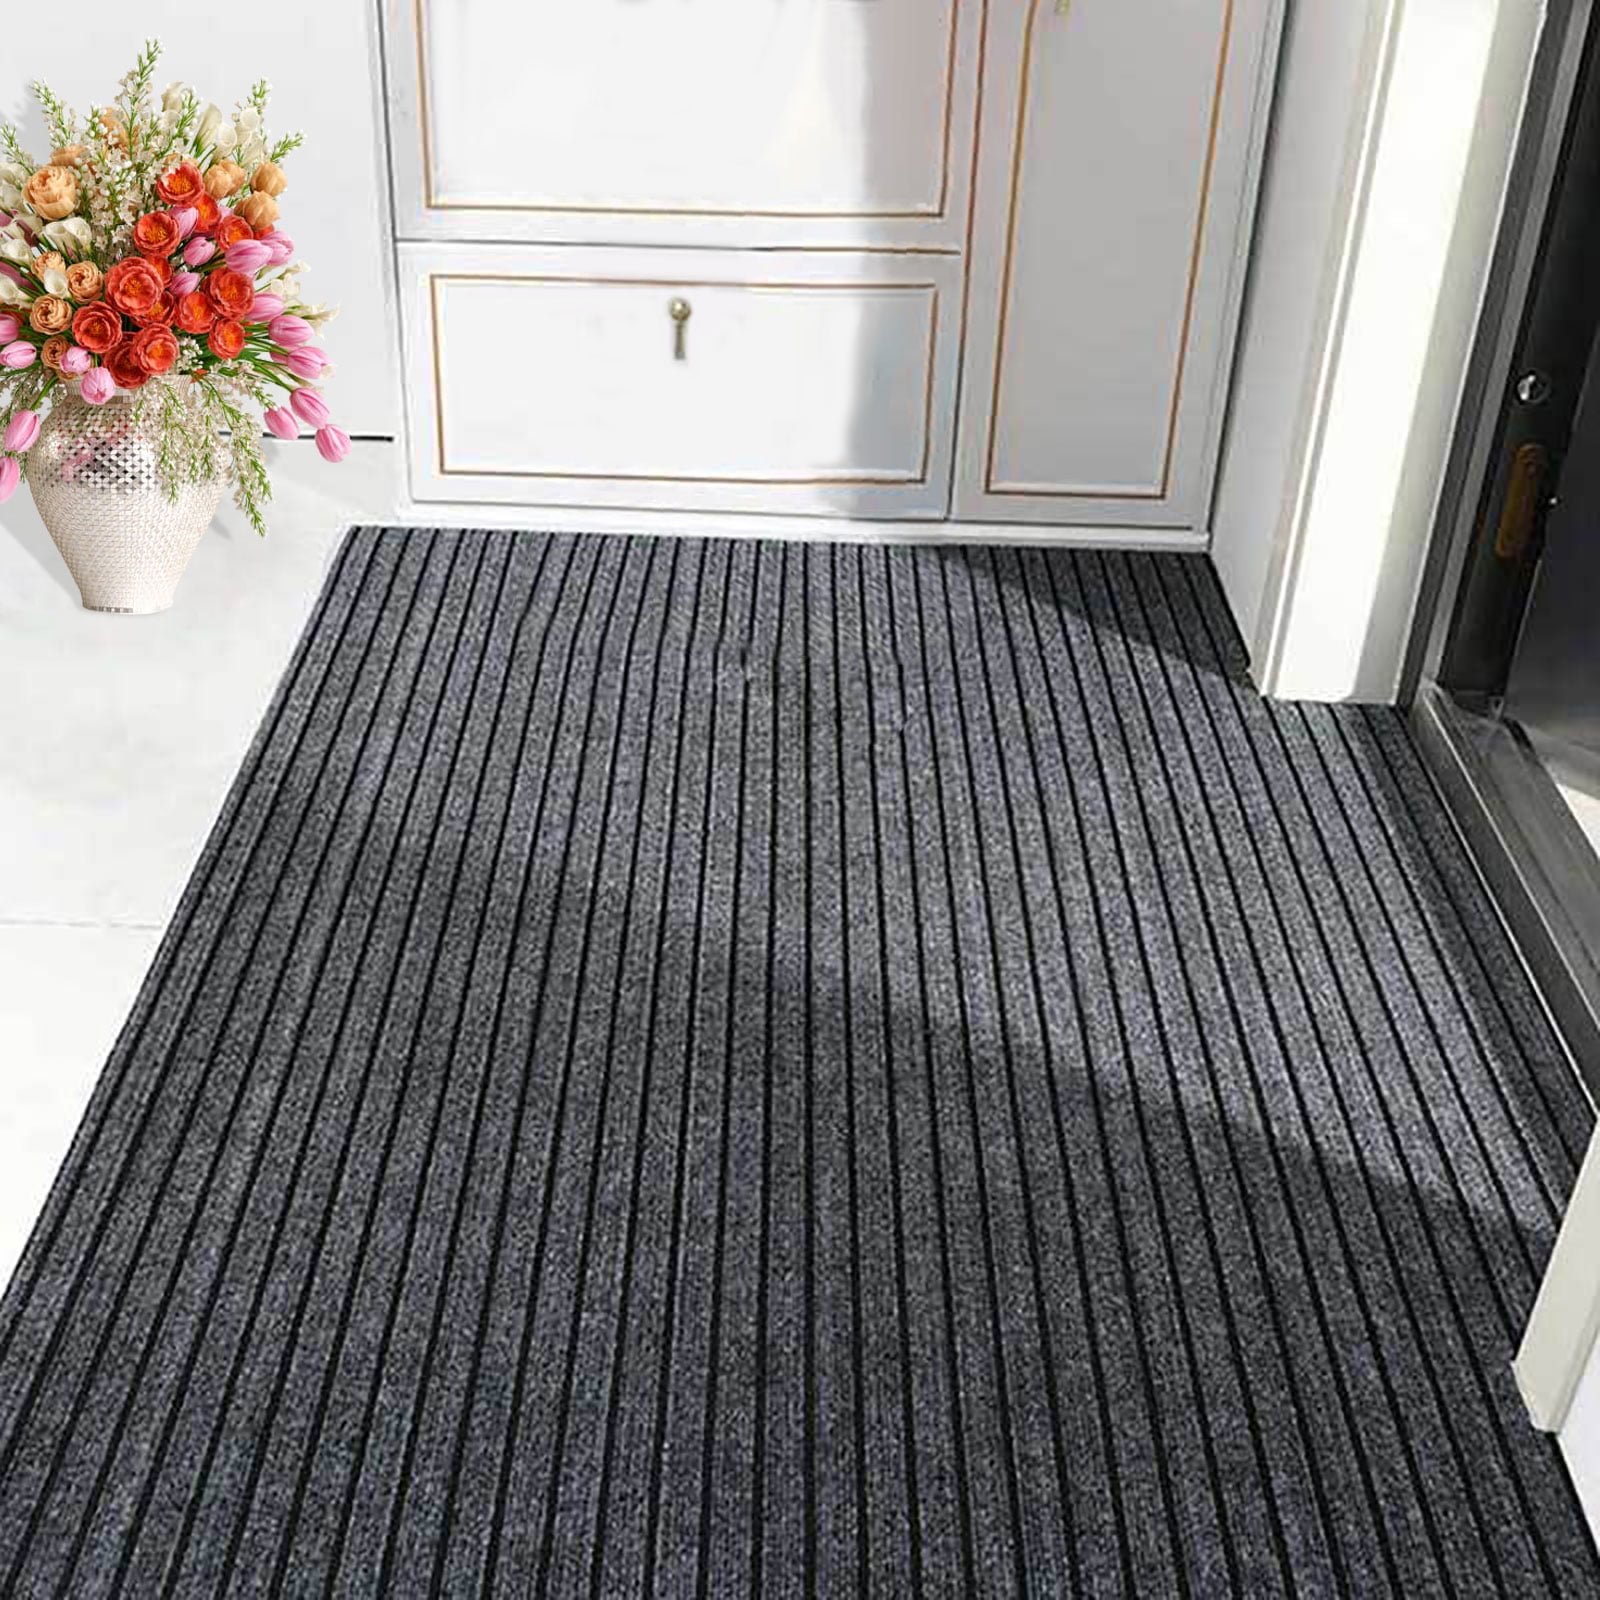 Front Door Mat Welcome Mats- Indoor Outdoor Rug Entryway Mats For Shoe  Scraper, Ideal For Inside Outside Home High Traffic Area, 35.4 Inch X 23.6  Inch